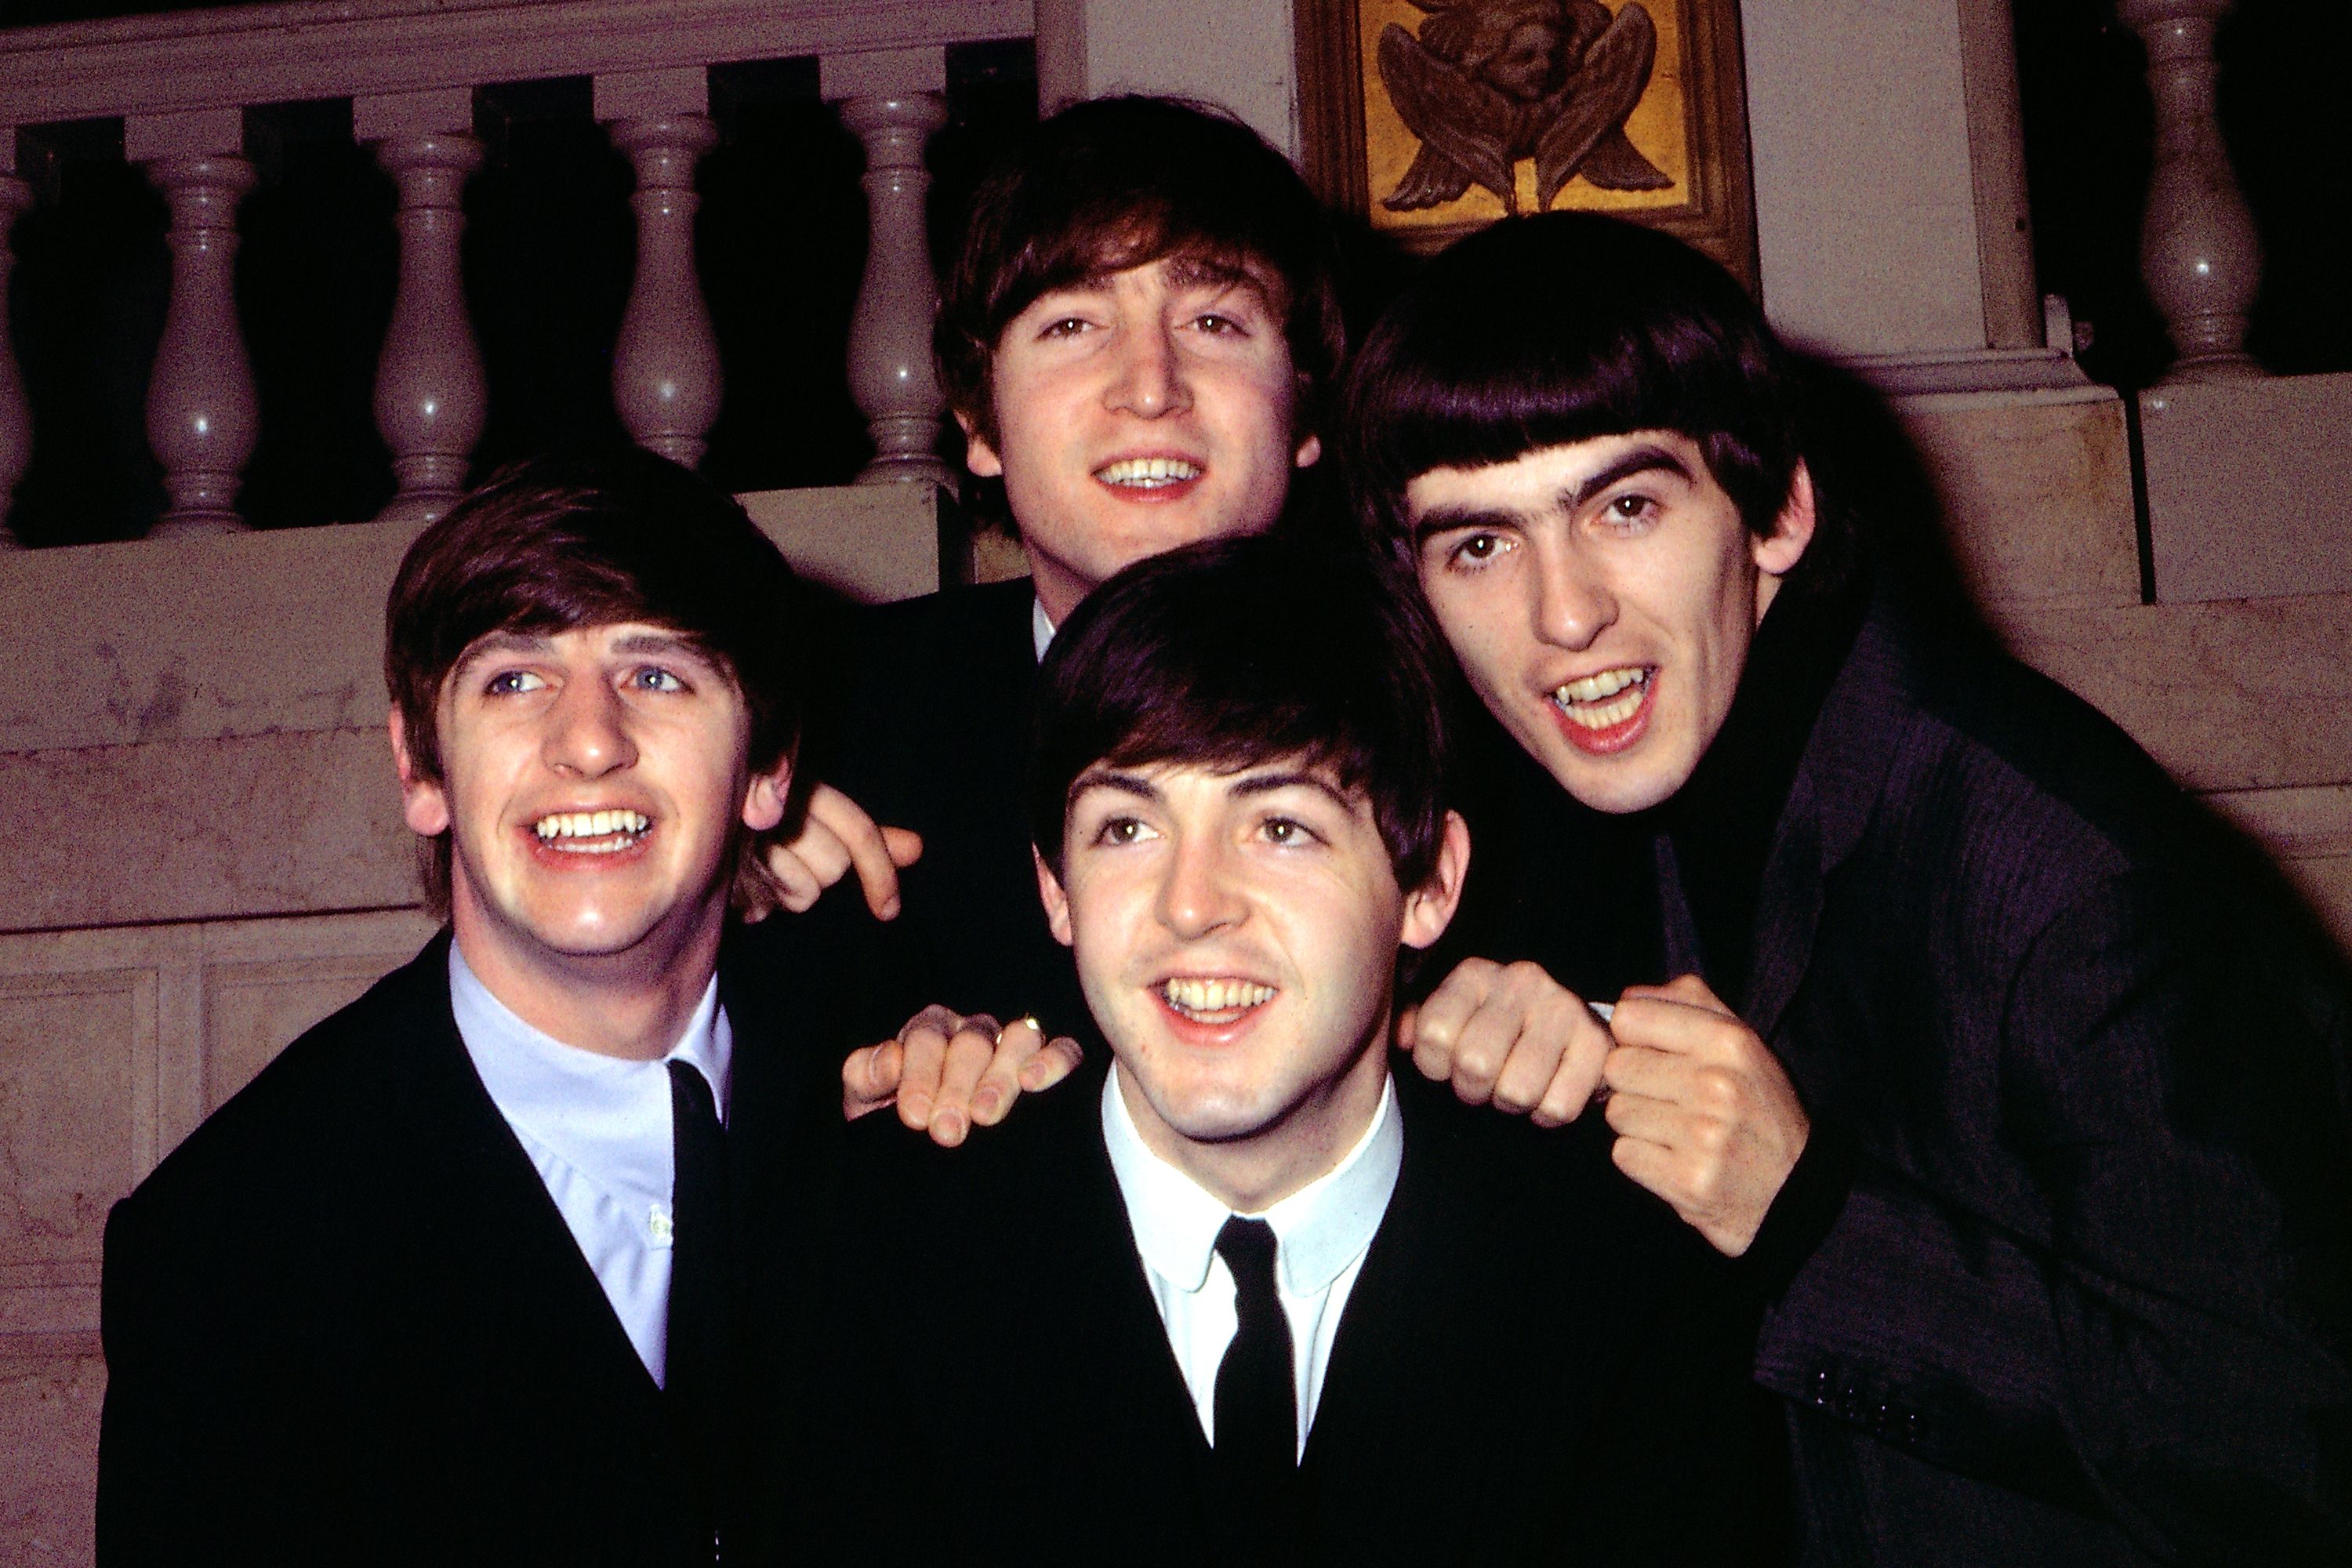 Beatles song, the band's 'last,' is 'quite emotional,' says Paul McCartney